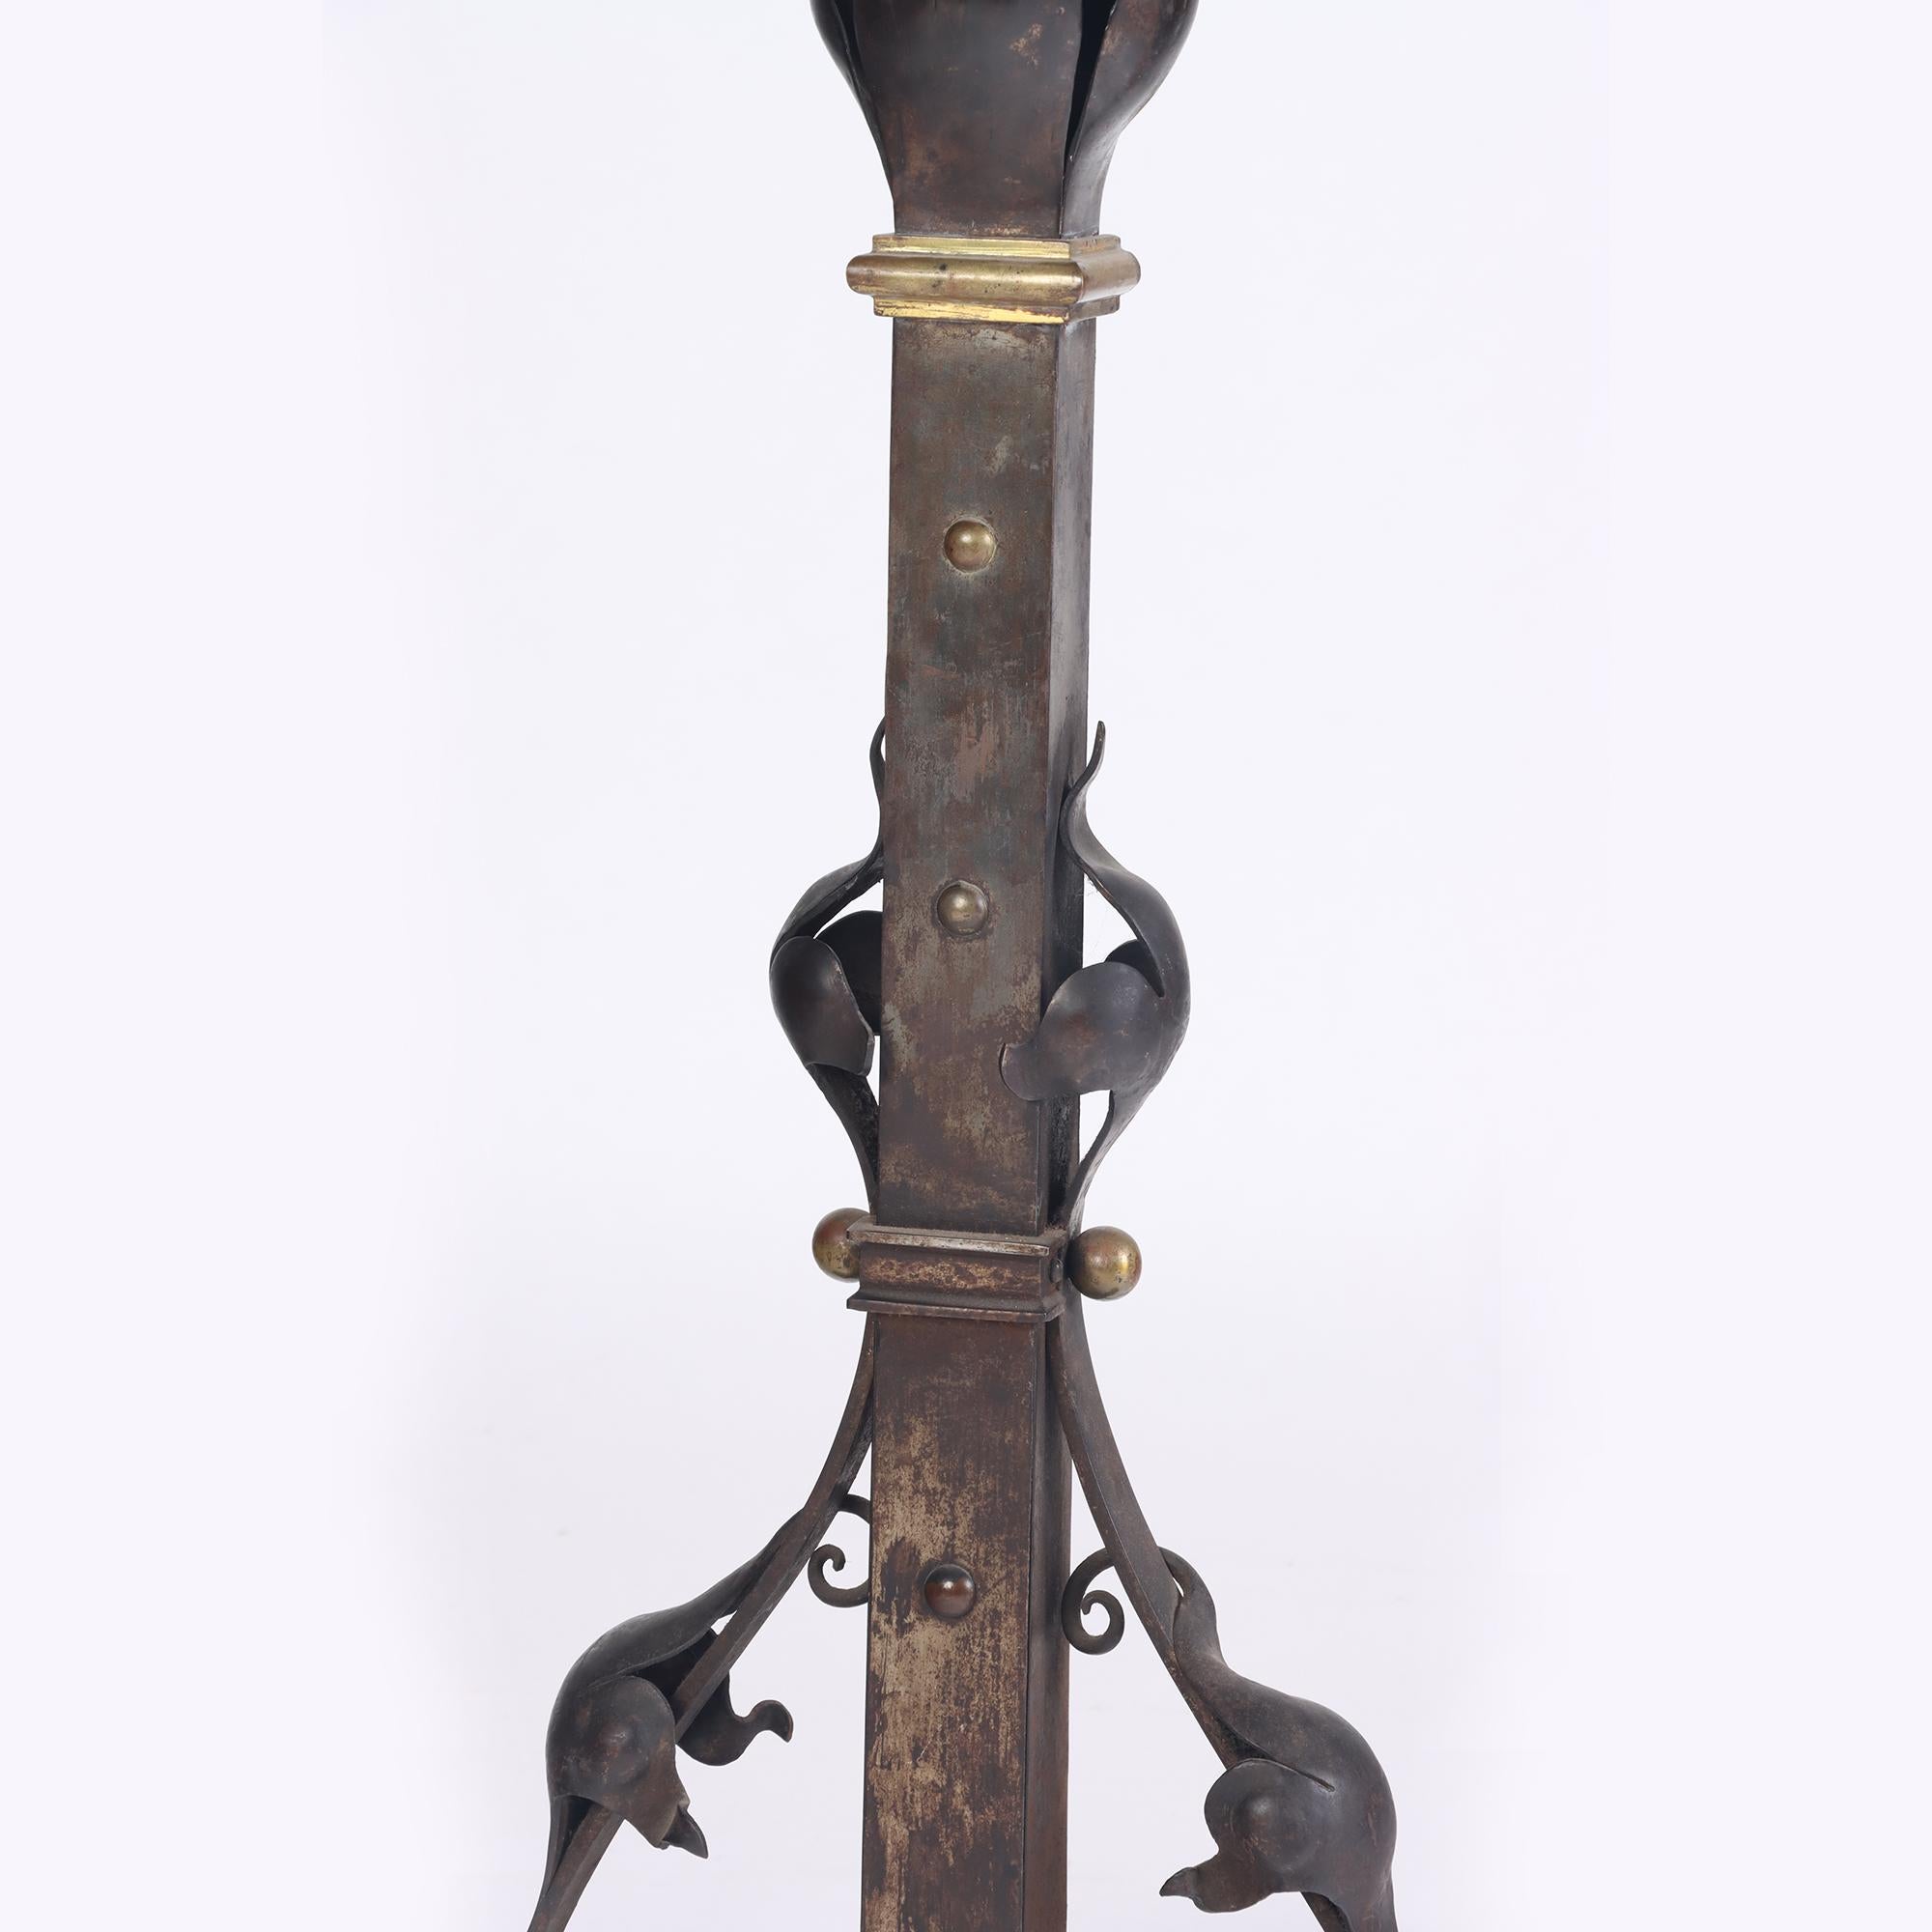 Substantial and Monumental Pair of Nineteenth Century French Wrought Iron and For Sale 2